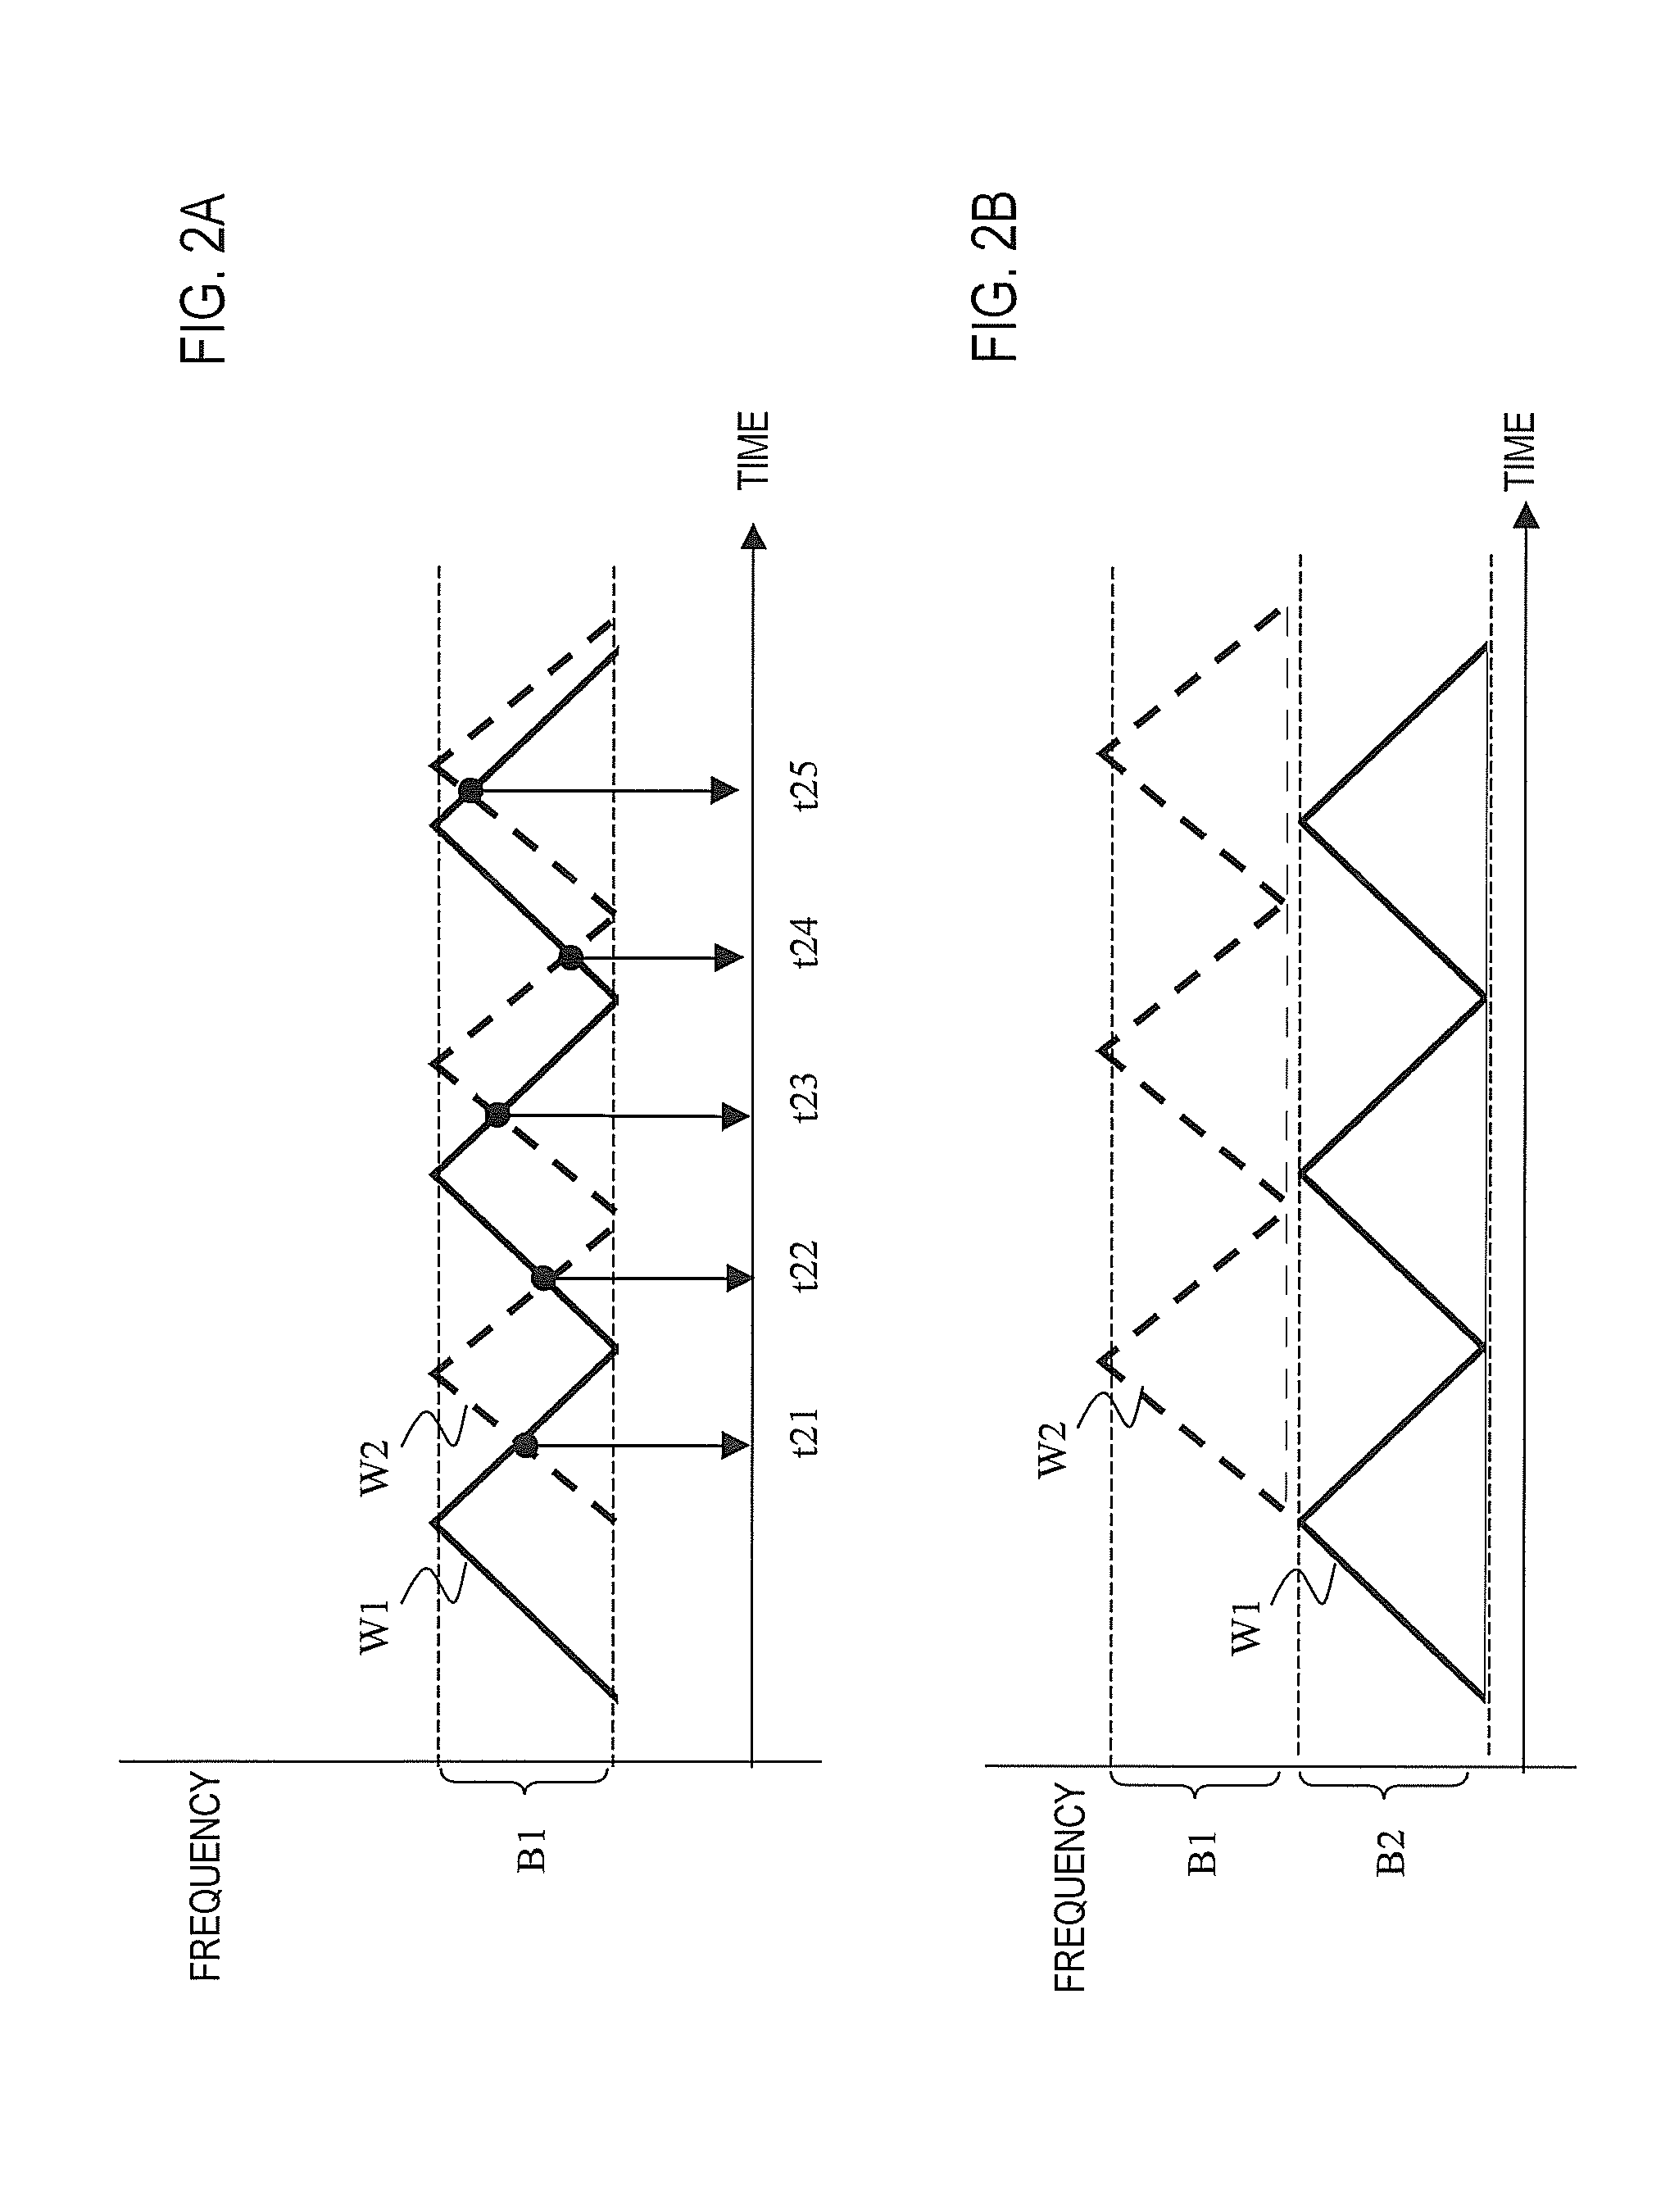 On-vehicle radar device and on-vehicle radar device control system